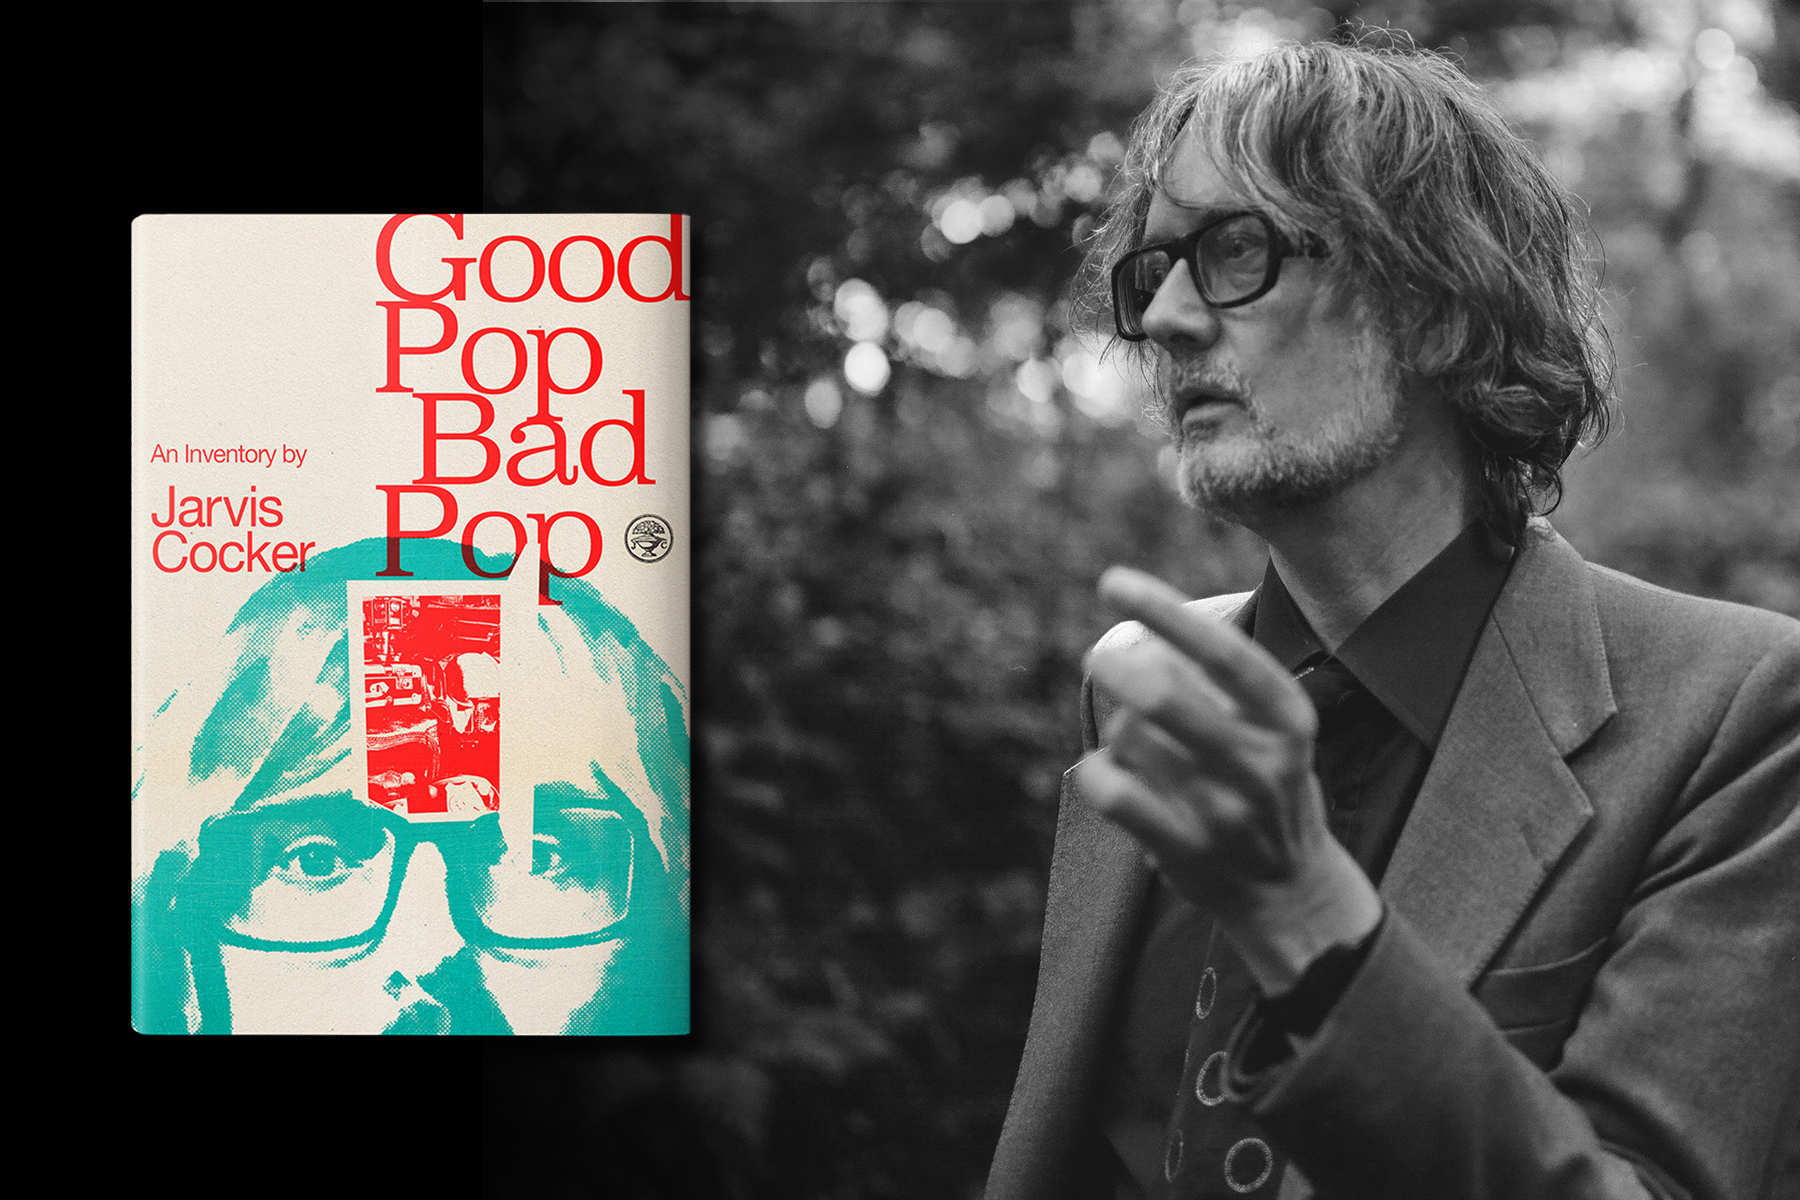 An image of the Good Pop Bad Pop book cover alongside a photo of author Jarvis Cocker